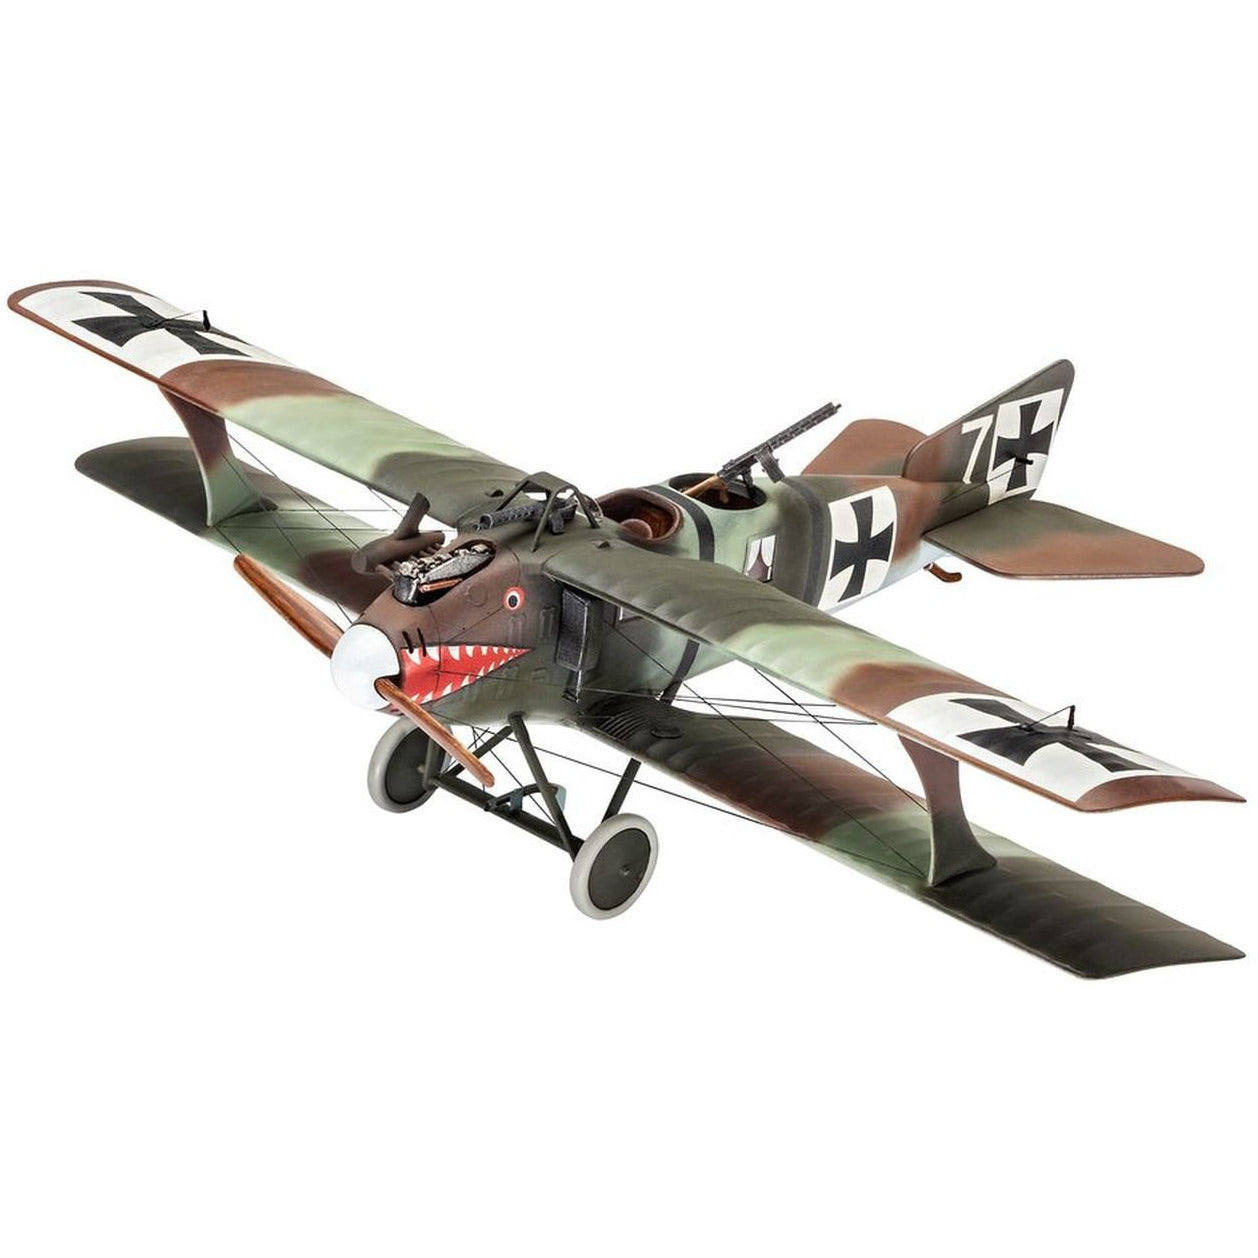 Roland C.II 1/48 by Revell